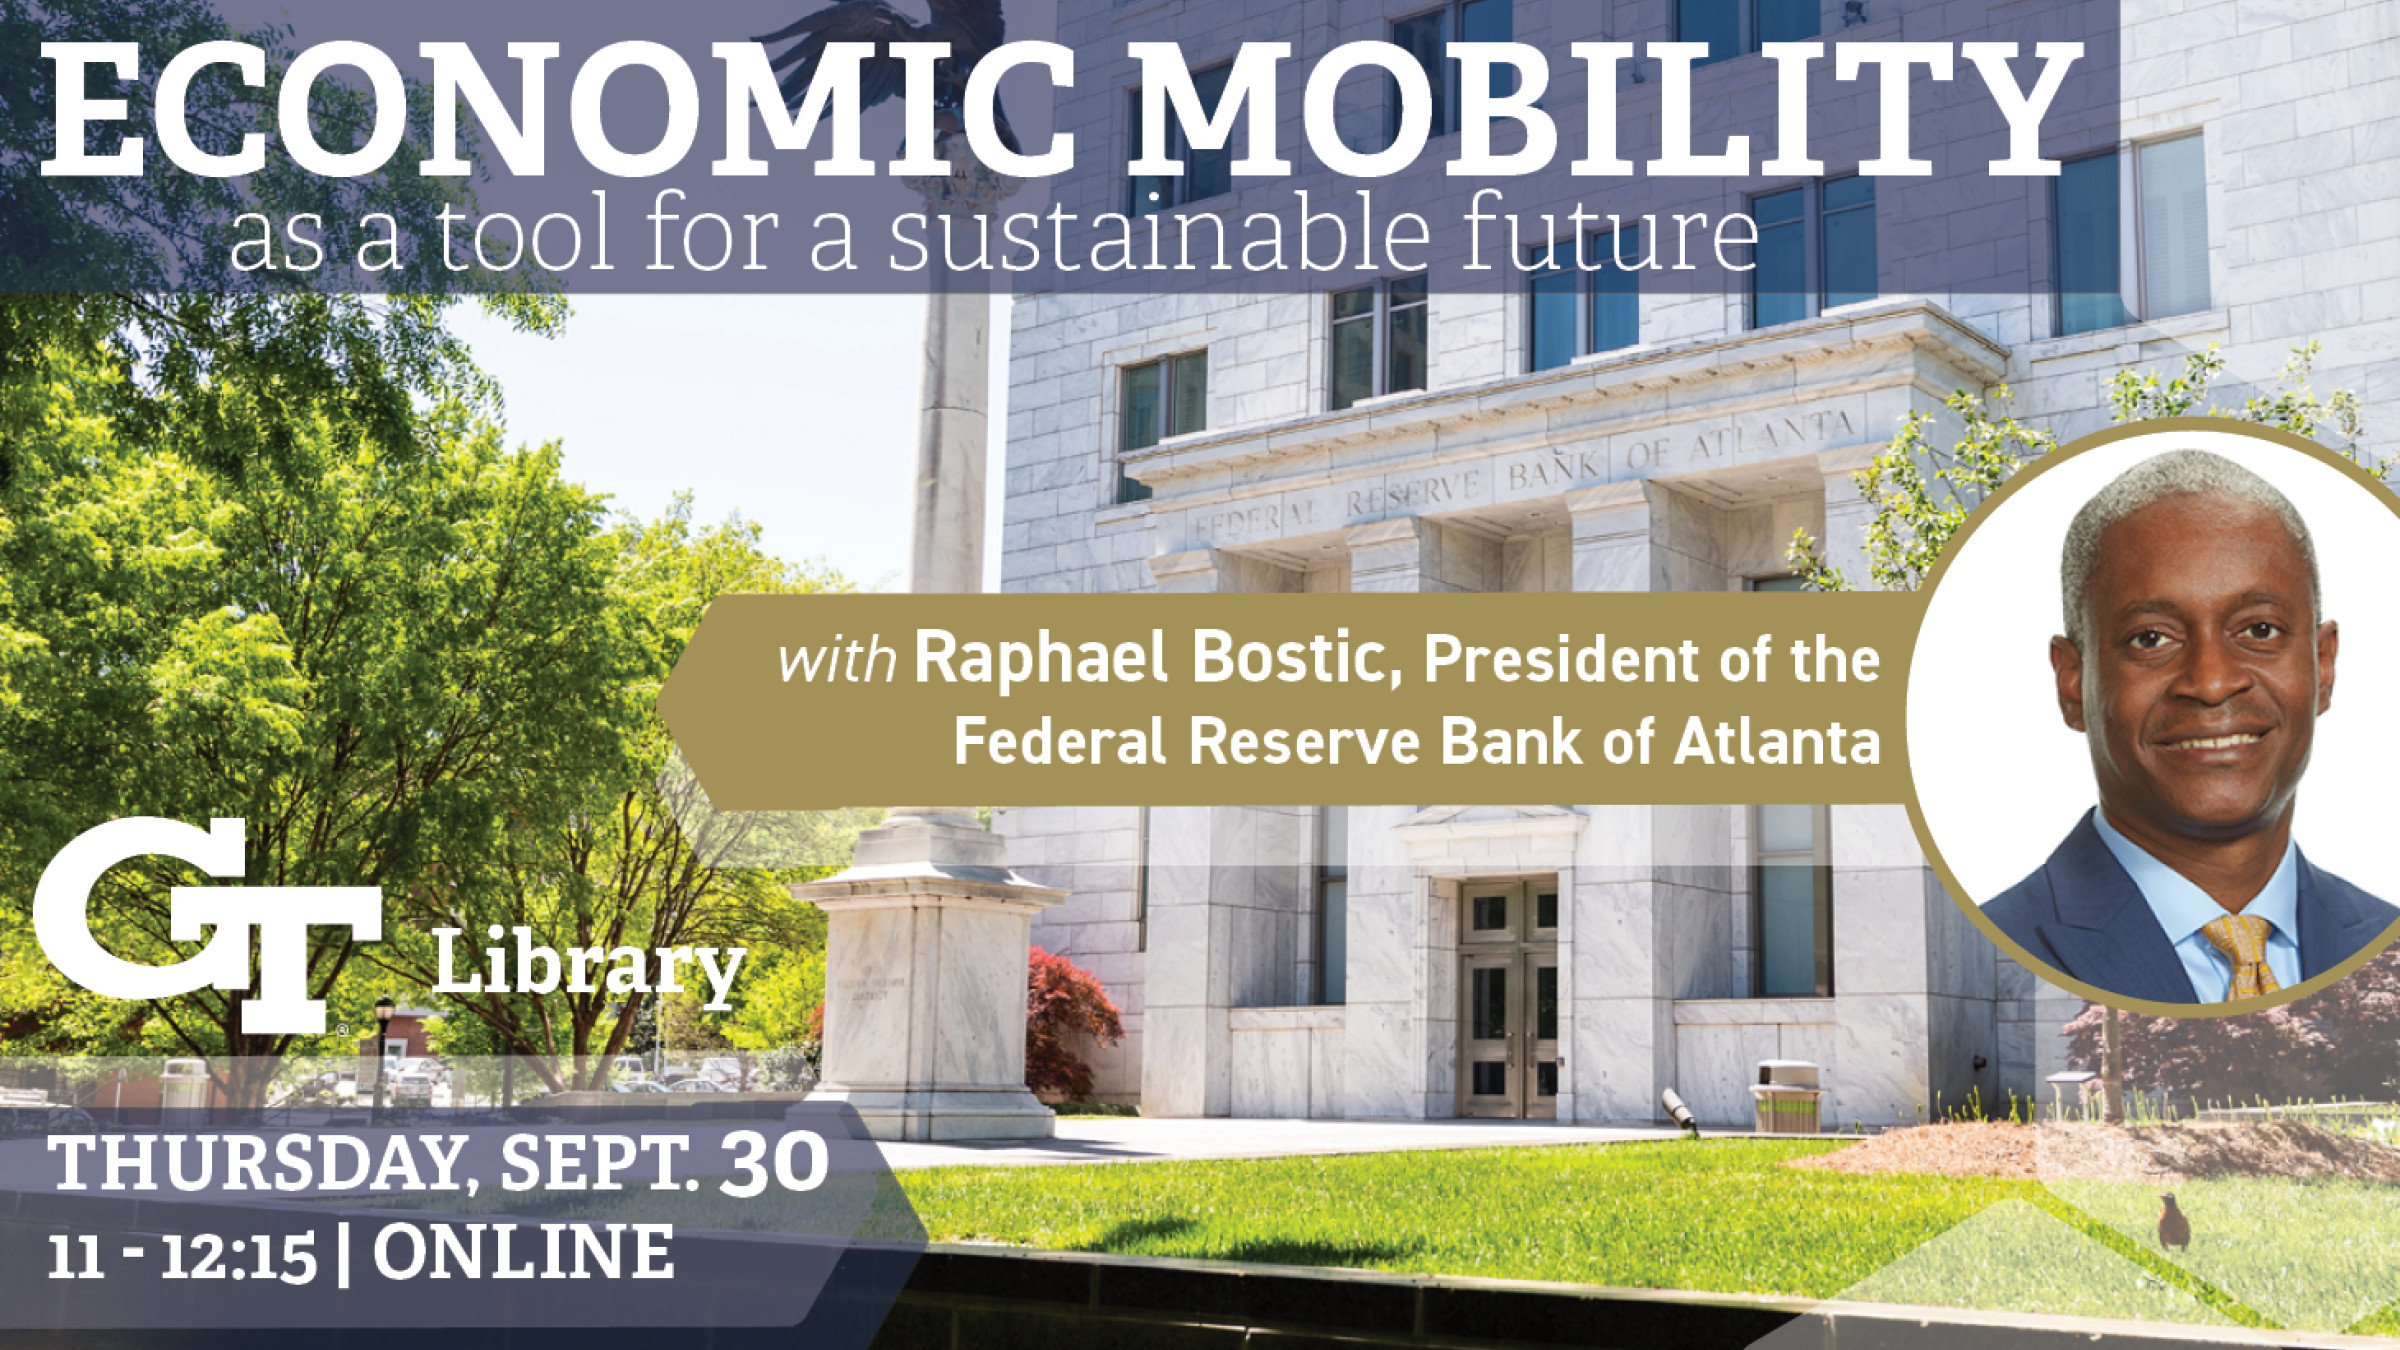 Economic Mobility as a Tool for a Sustainable Future with Raphael Bostic, President of the Federal Reserve Bank of Atlanta (ONLINE)